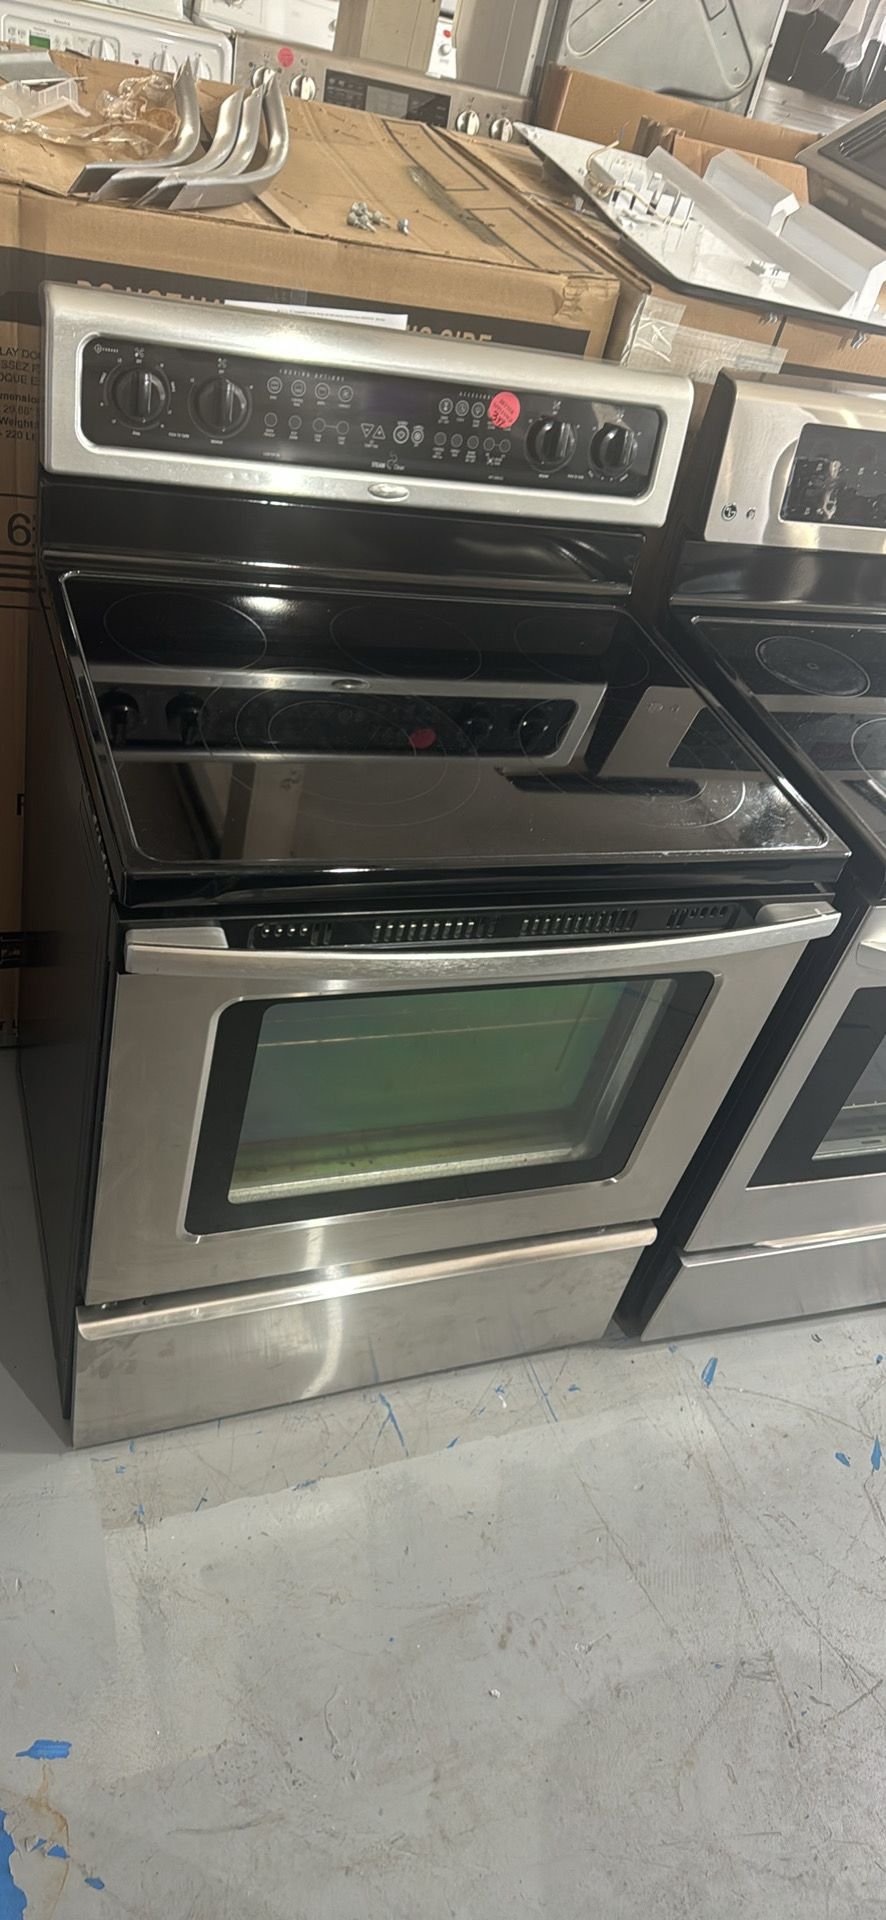 Whirlpool Used Electric Range Freestanding – Stainless